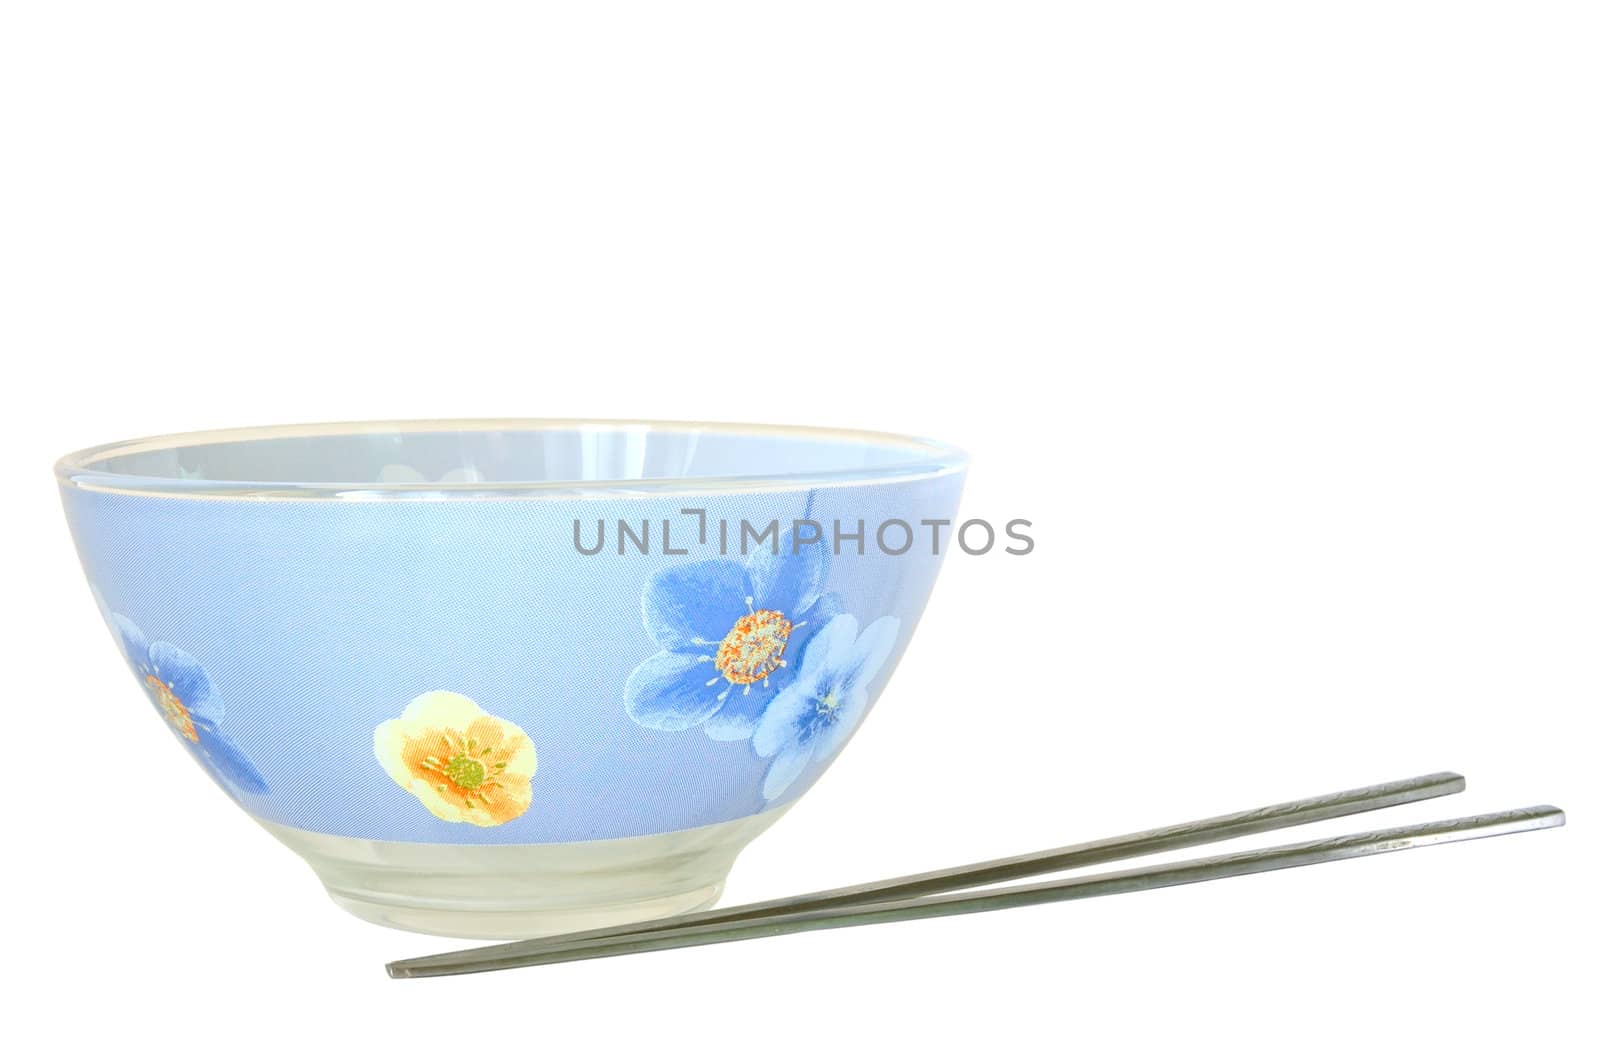 Blue cup and two steel chopsticks. On isolated background.